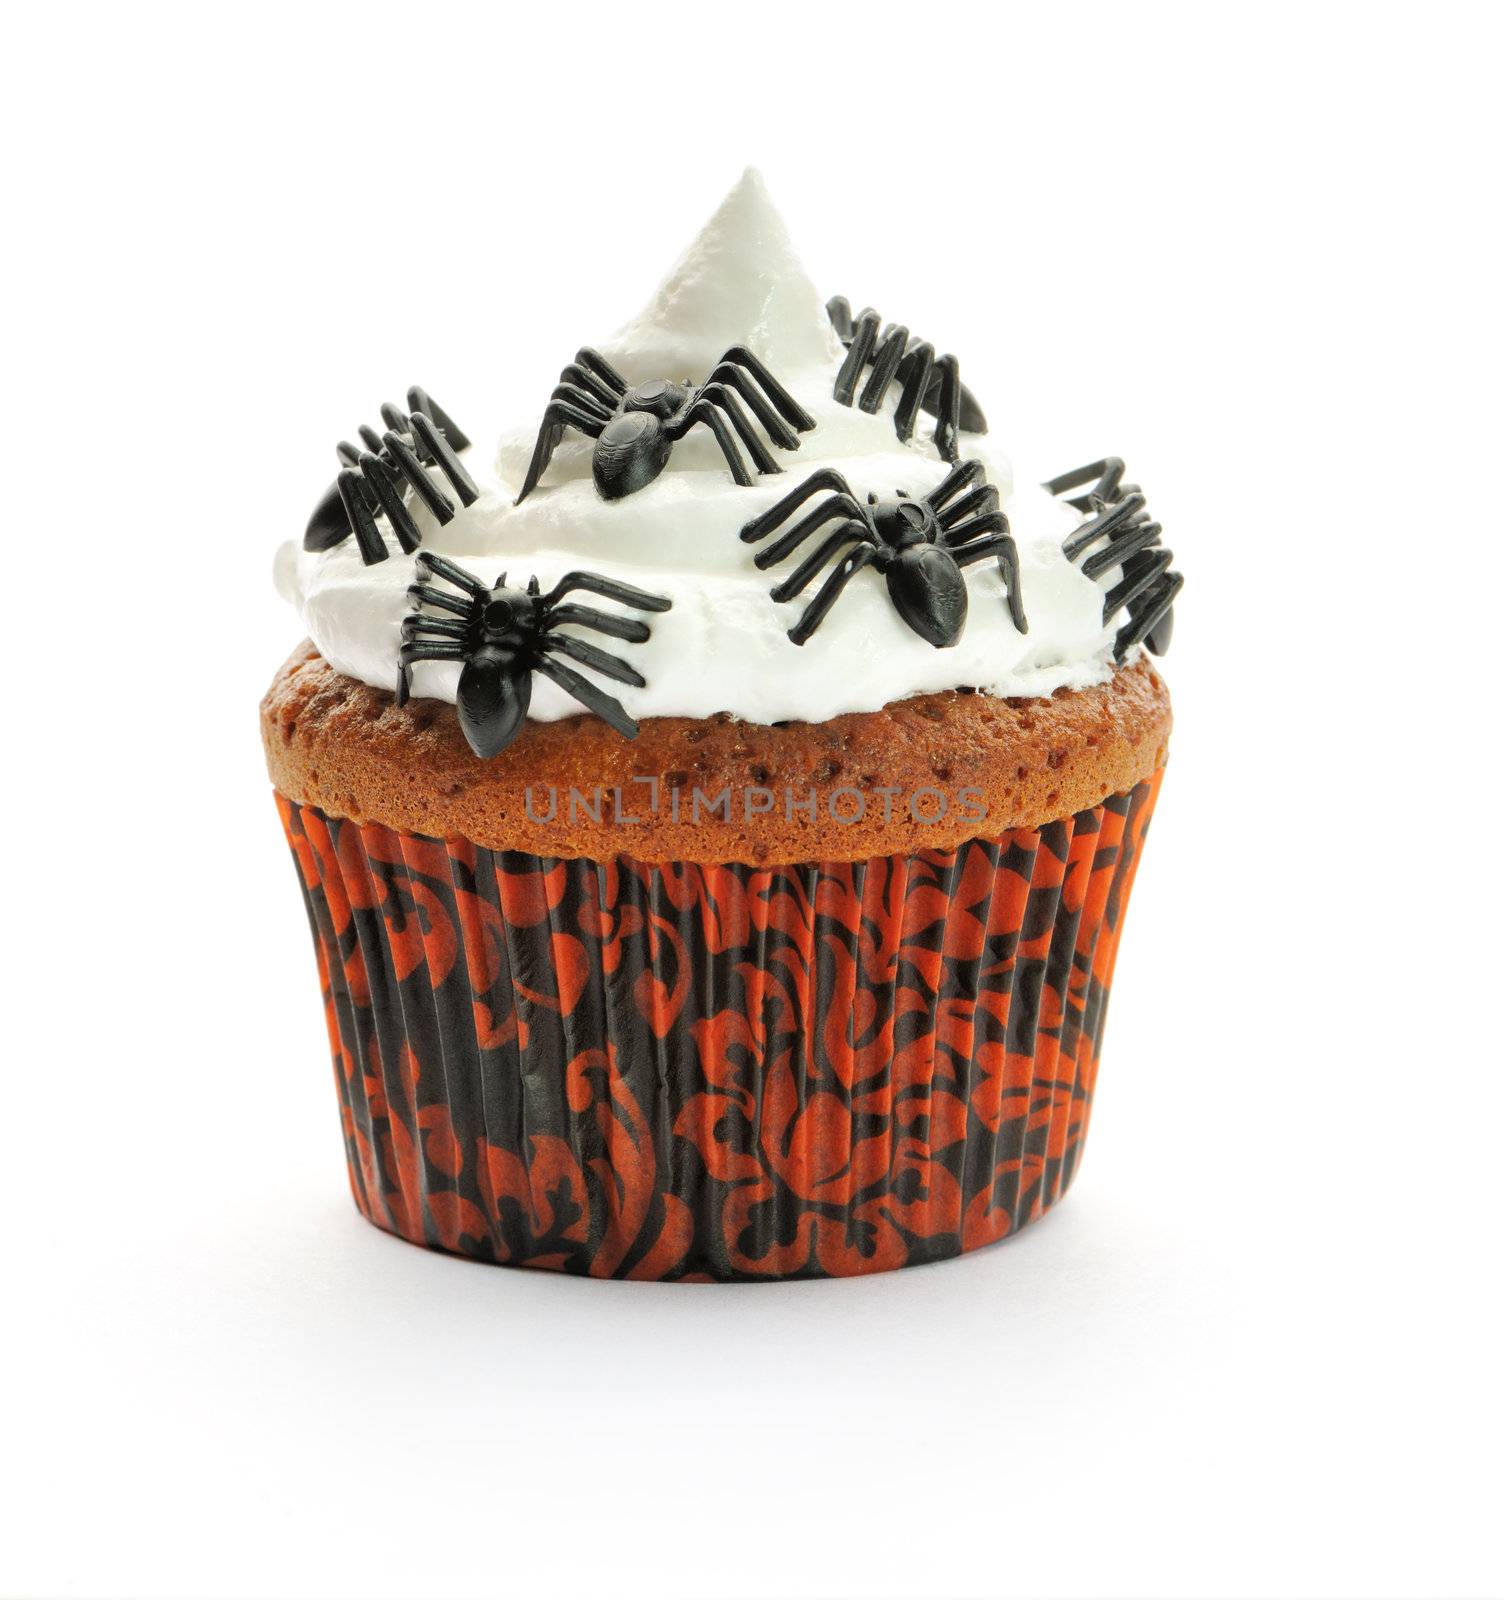 Halloween cupcake with whipped cream and decoration isolated on white